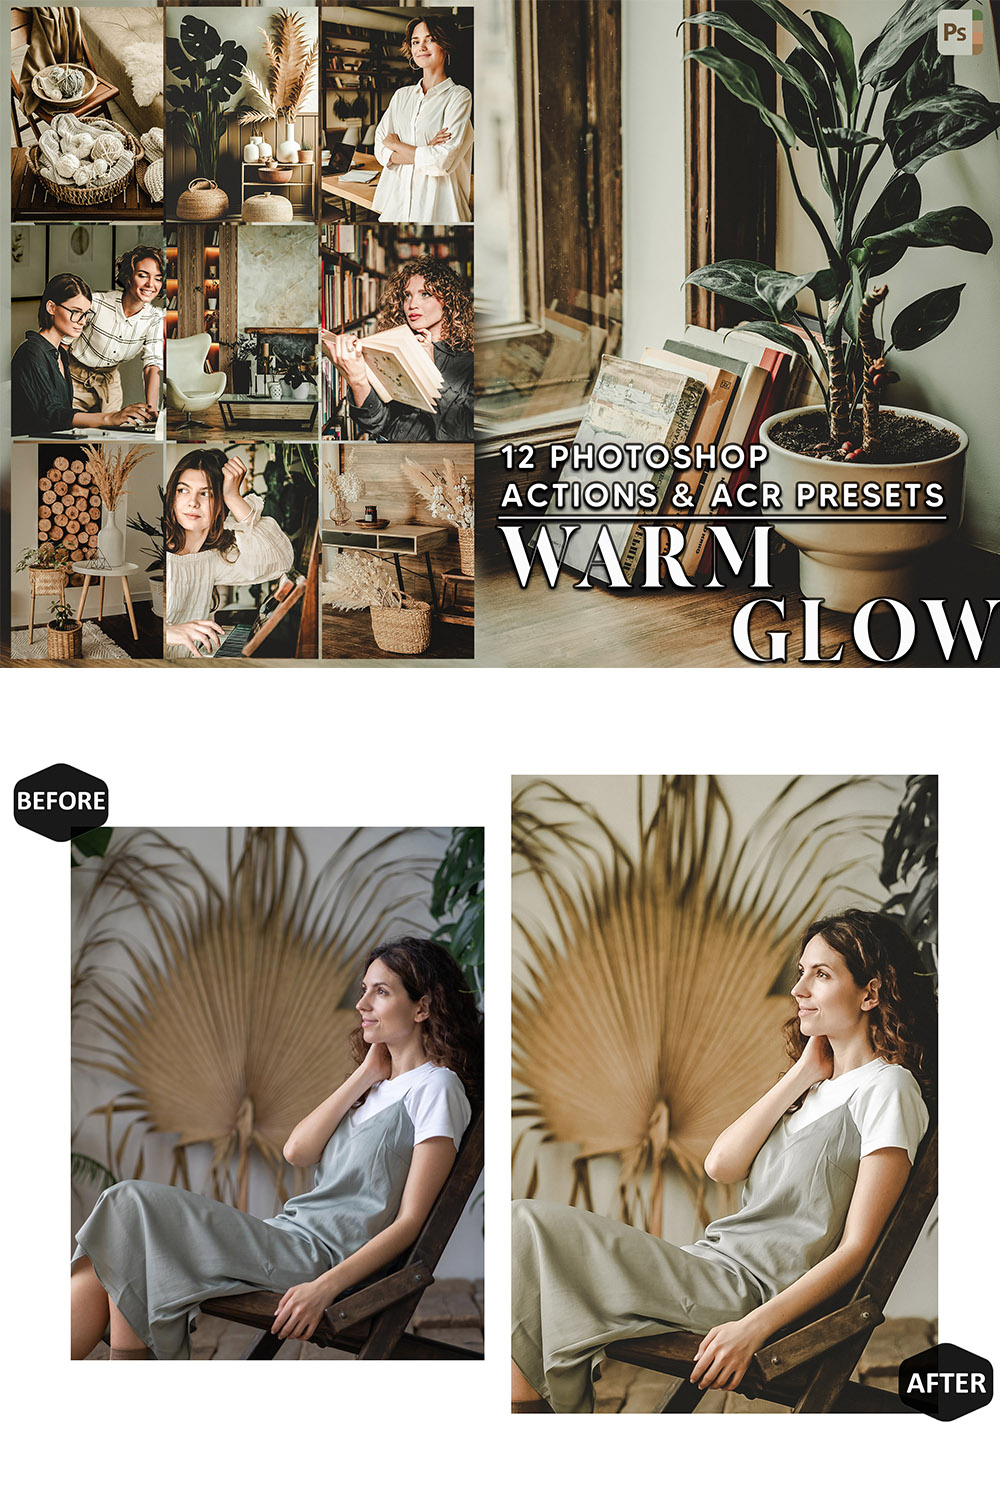 12 Photoshop Actions, Warm Glow Ps Action, Vintage Style ACR Preset, Moody Ps Filter, Atn Portrait And Lifestyle Theme For Instagram, Blogger pinterest preview image.